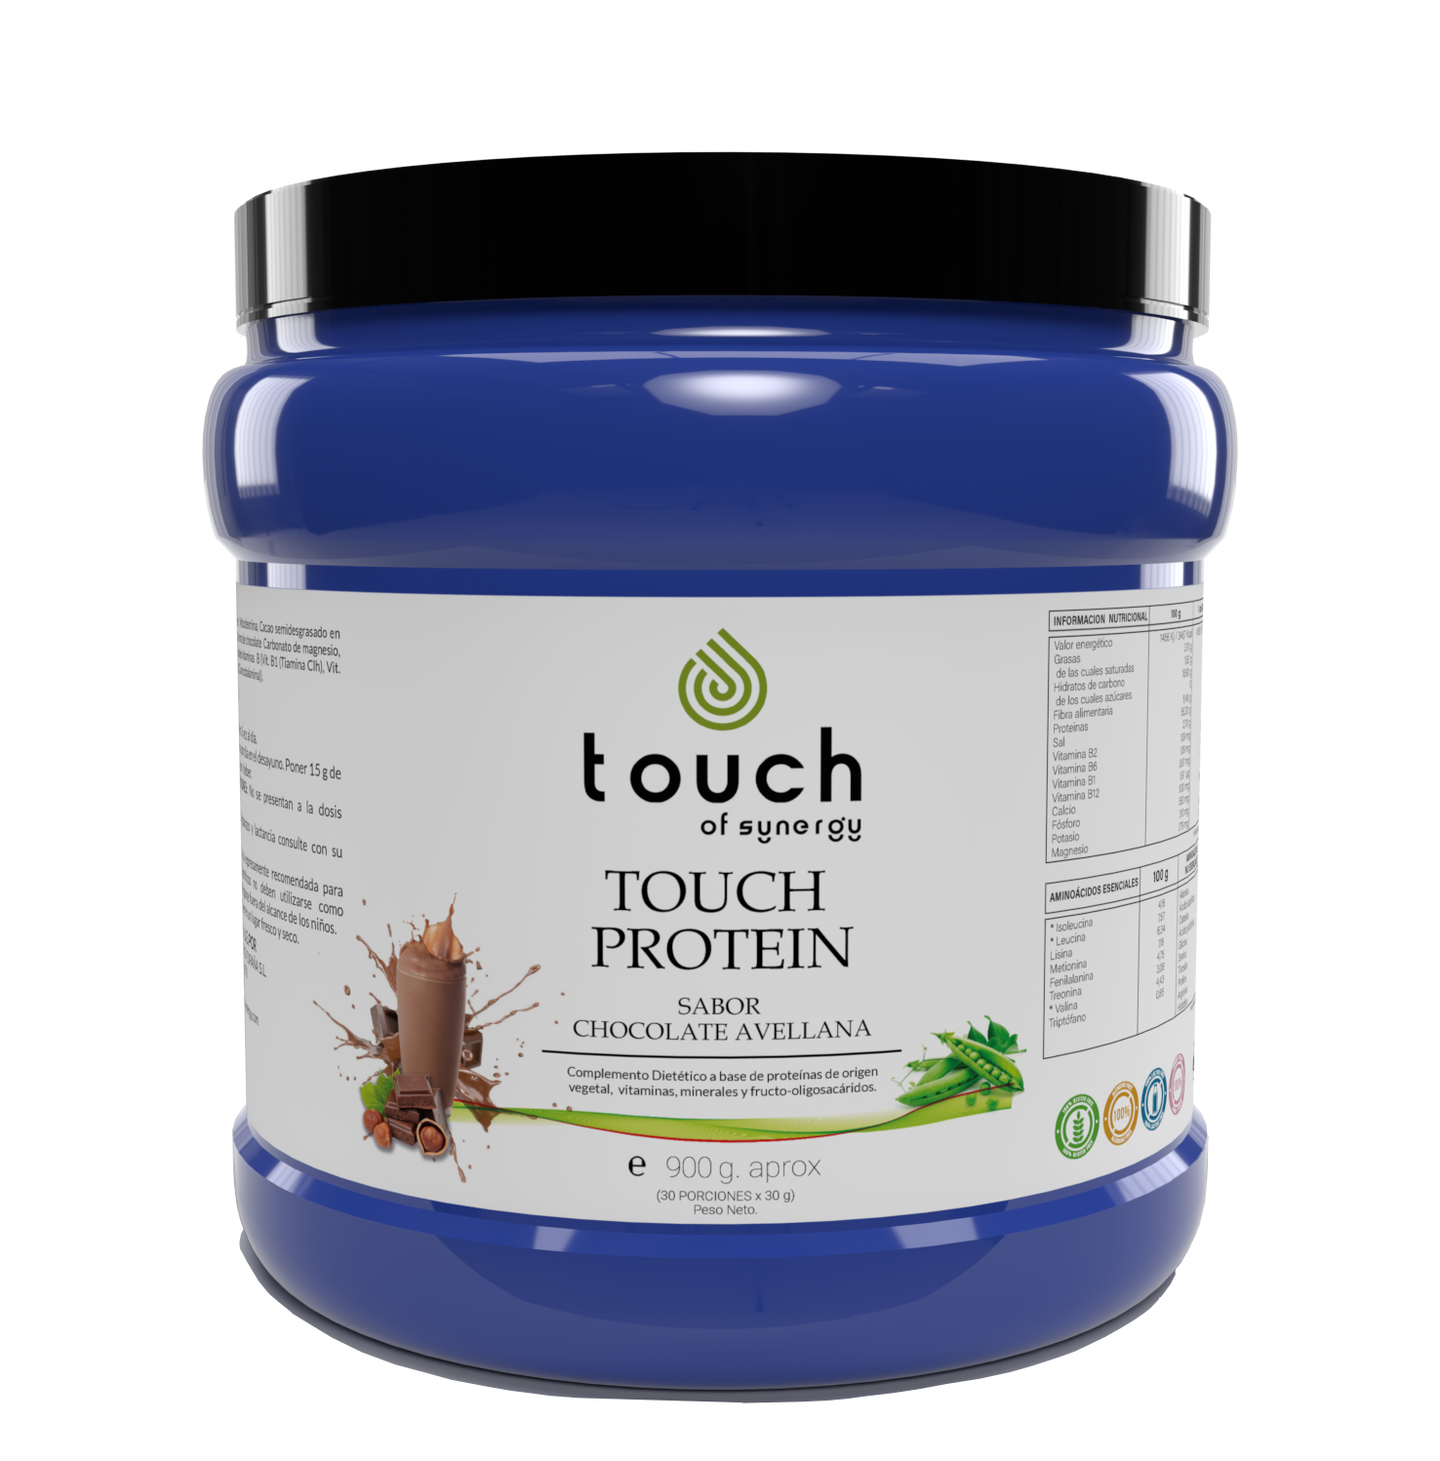 Touch Protein Chocolate Avellana 900 gramos (30 porciones de 30 gramos - 17 gramos de proteína por porción)